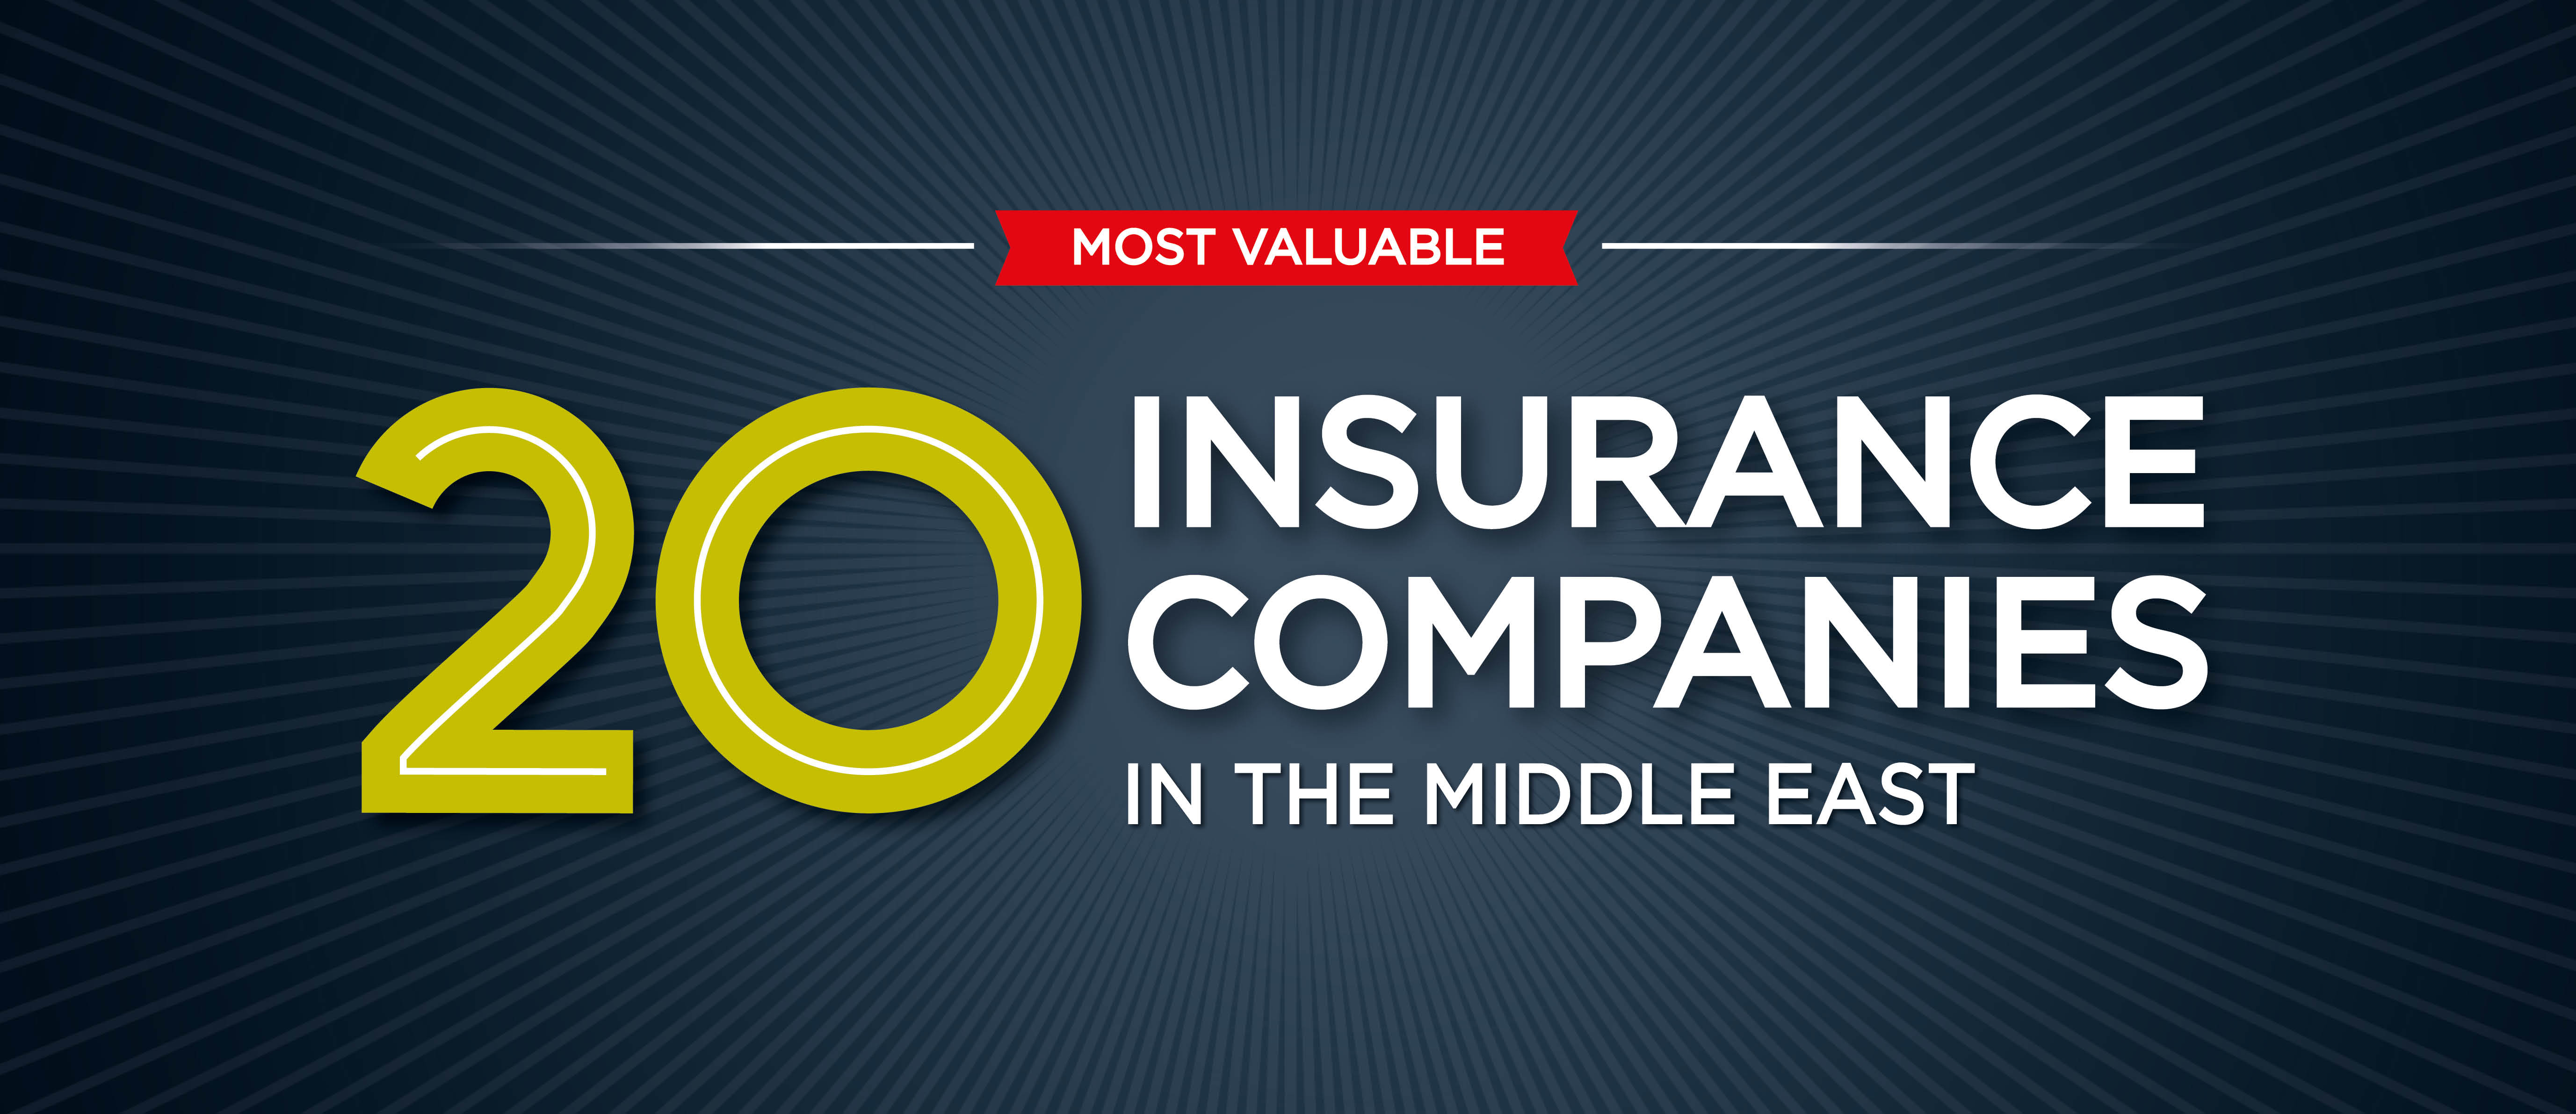 Most Valuable Insurance Companies 2020